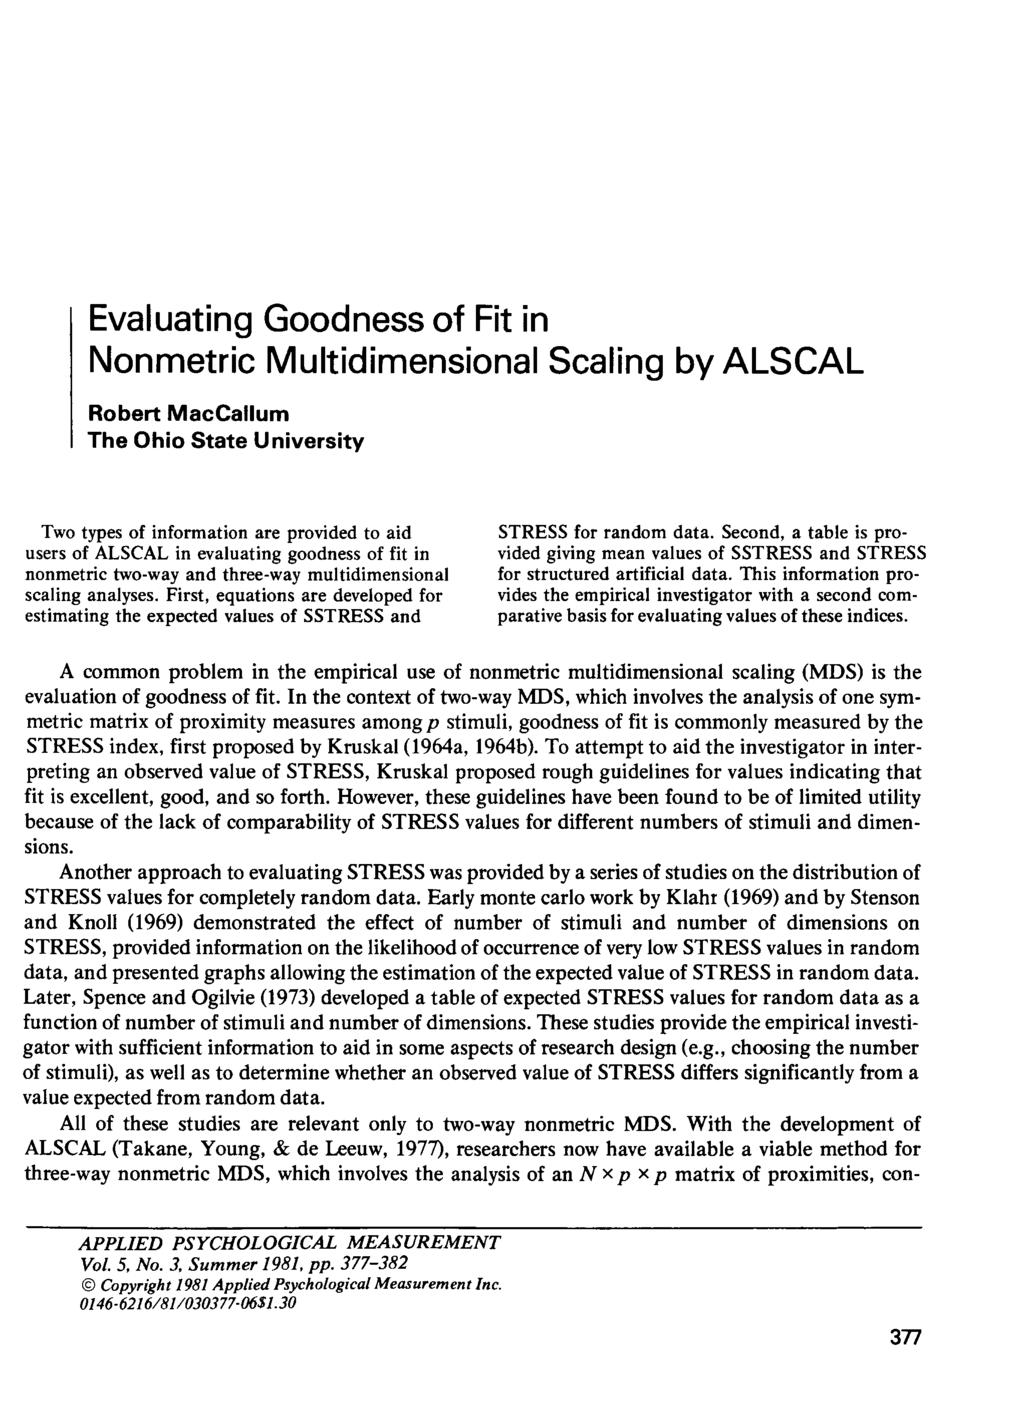 Evaluating Goodness of Fit in Nonmetric Multidimensional Scaling by ALSCAL Robert MacCallum The Ohio State University Two types of information are provided to aid users of ALSCAL in evaluating